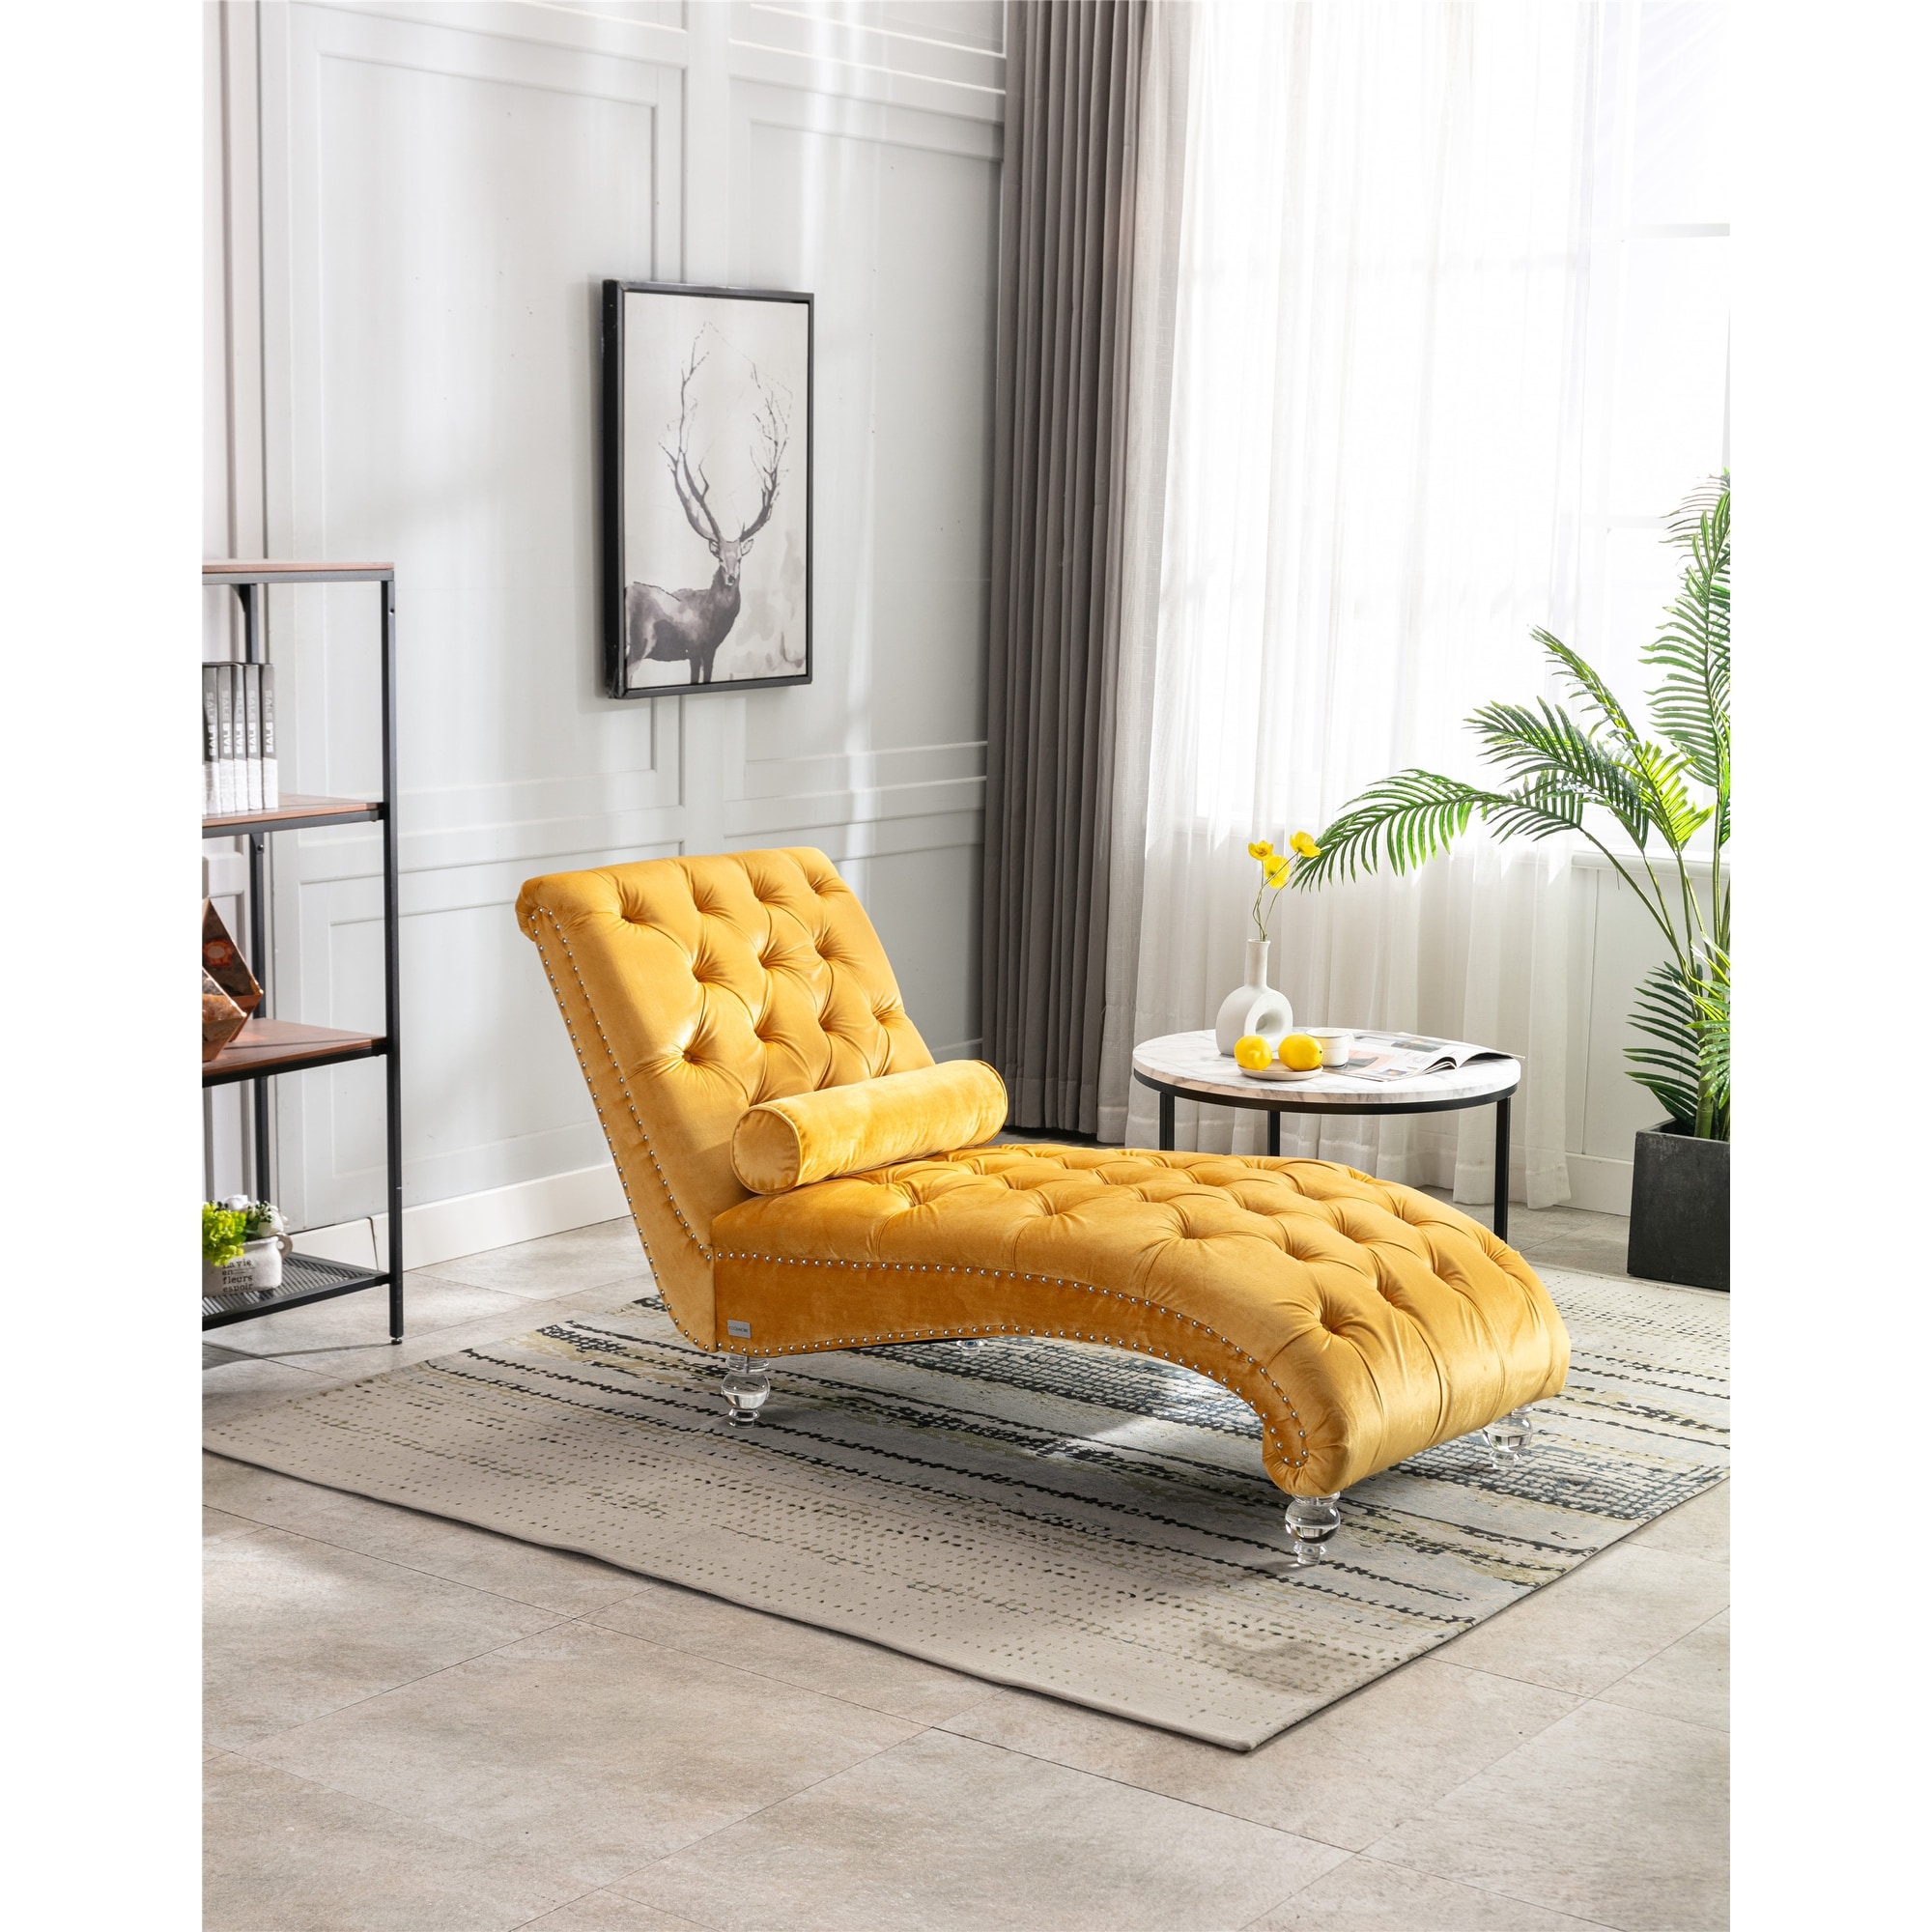 EDWINRAY Contemporary Style Leisure Concubine Sofa with Lumbar Support Pillow and Acrylic Feet for Living Room, Mustard